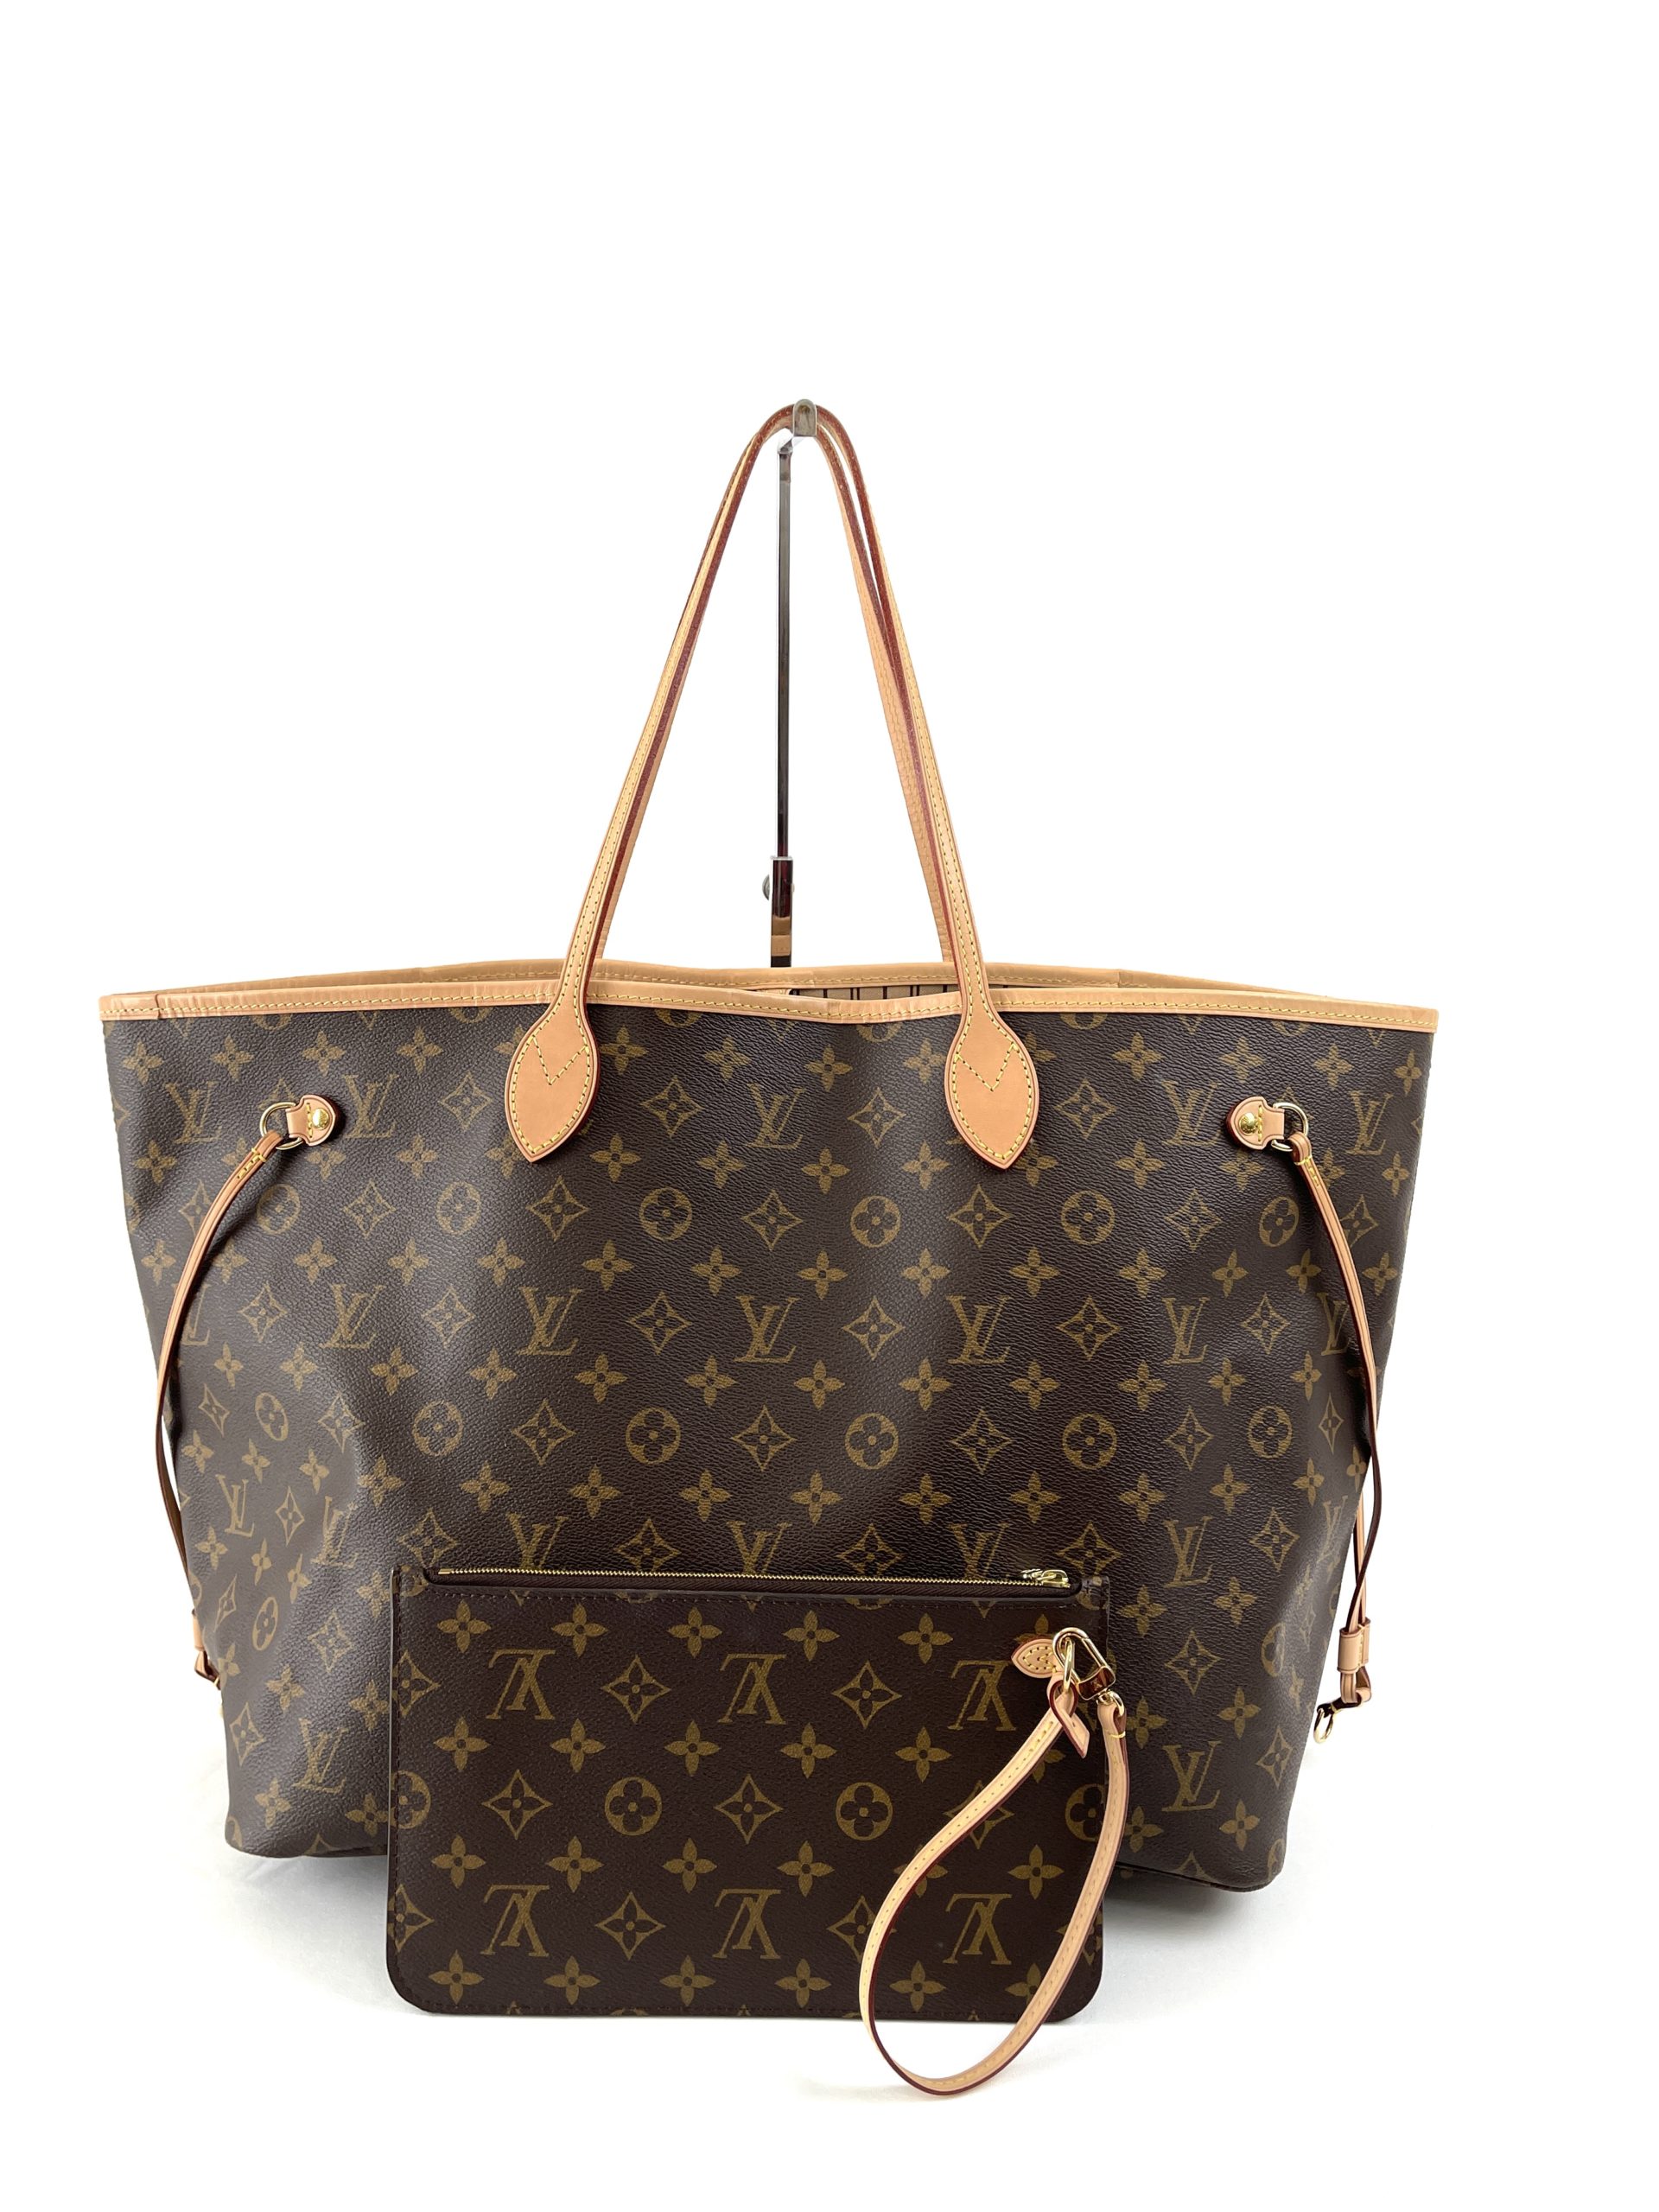 Luxury Reborn Bags - 𝓮𝓼𝓬𝓪𝓹𝓮 the ᴏʀᴅɪɴᴀʀʏ ✨ feat: ready to purchase,  LV Neverfull MM in brown monogram canvas with LRB embellishments that  incl